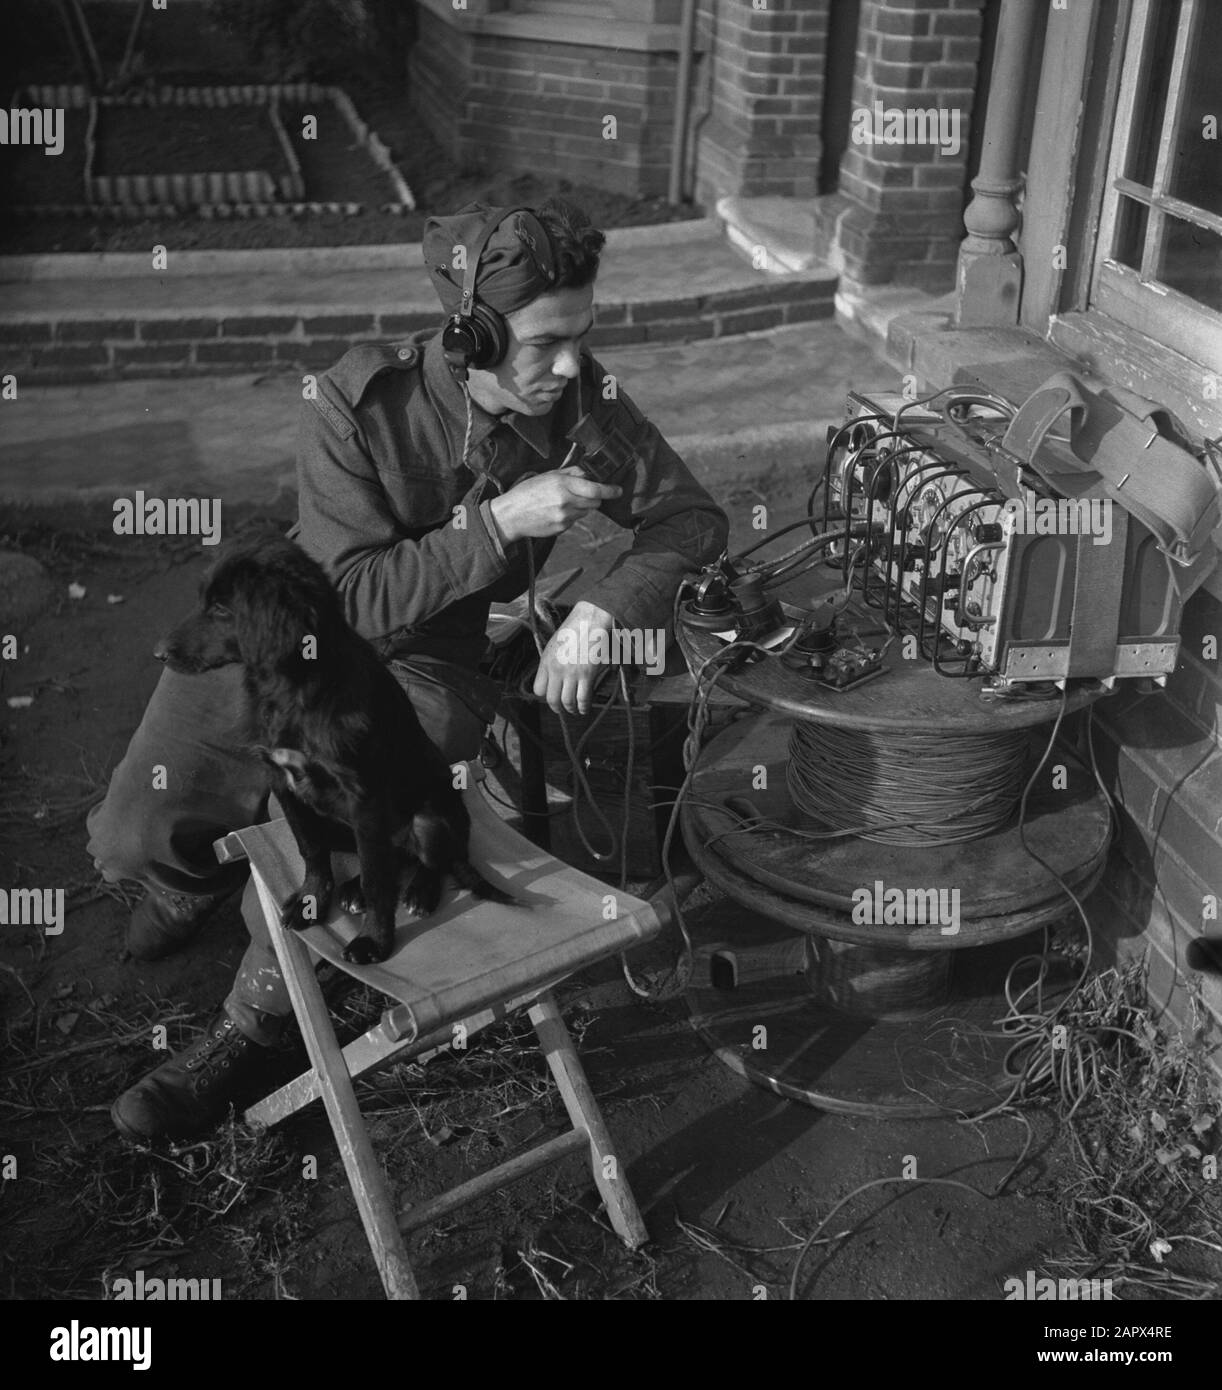 Princess Irene Brigade. Dutch soldiers in training. Radio telegraphist at work Annotation: In the foreground a young dog Date: 1943 Location: Great Britain Keywords: army, soldiers, world war II Stock Photo